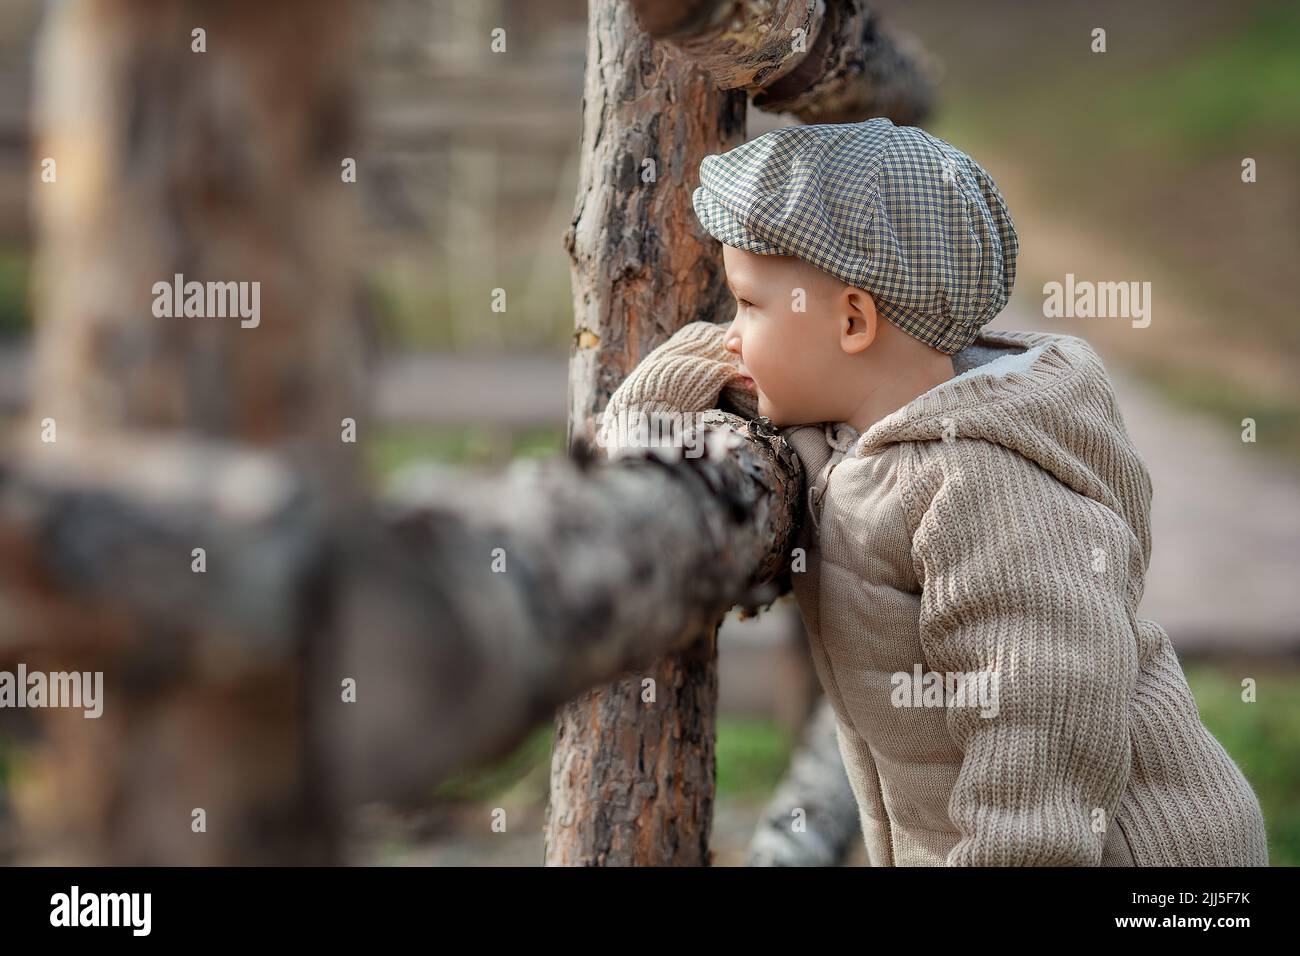 Bully boy kid with a slingshot aims at someone near a fence in the village outdoors. Rustic barefoot child boy with a hat shoots a slingshot. Stock Photo